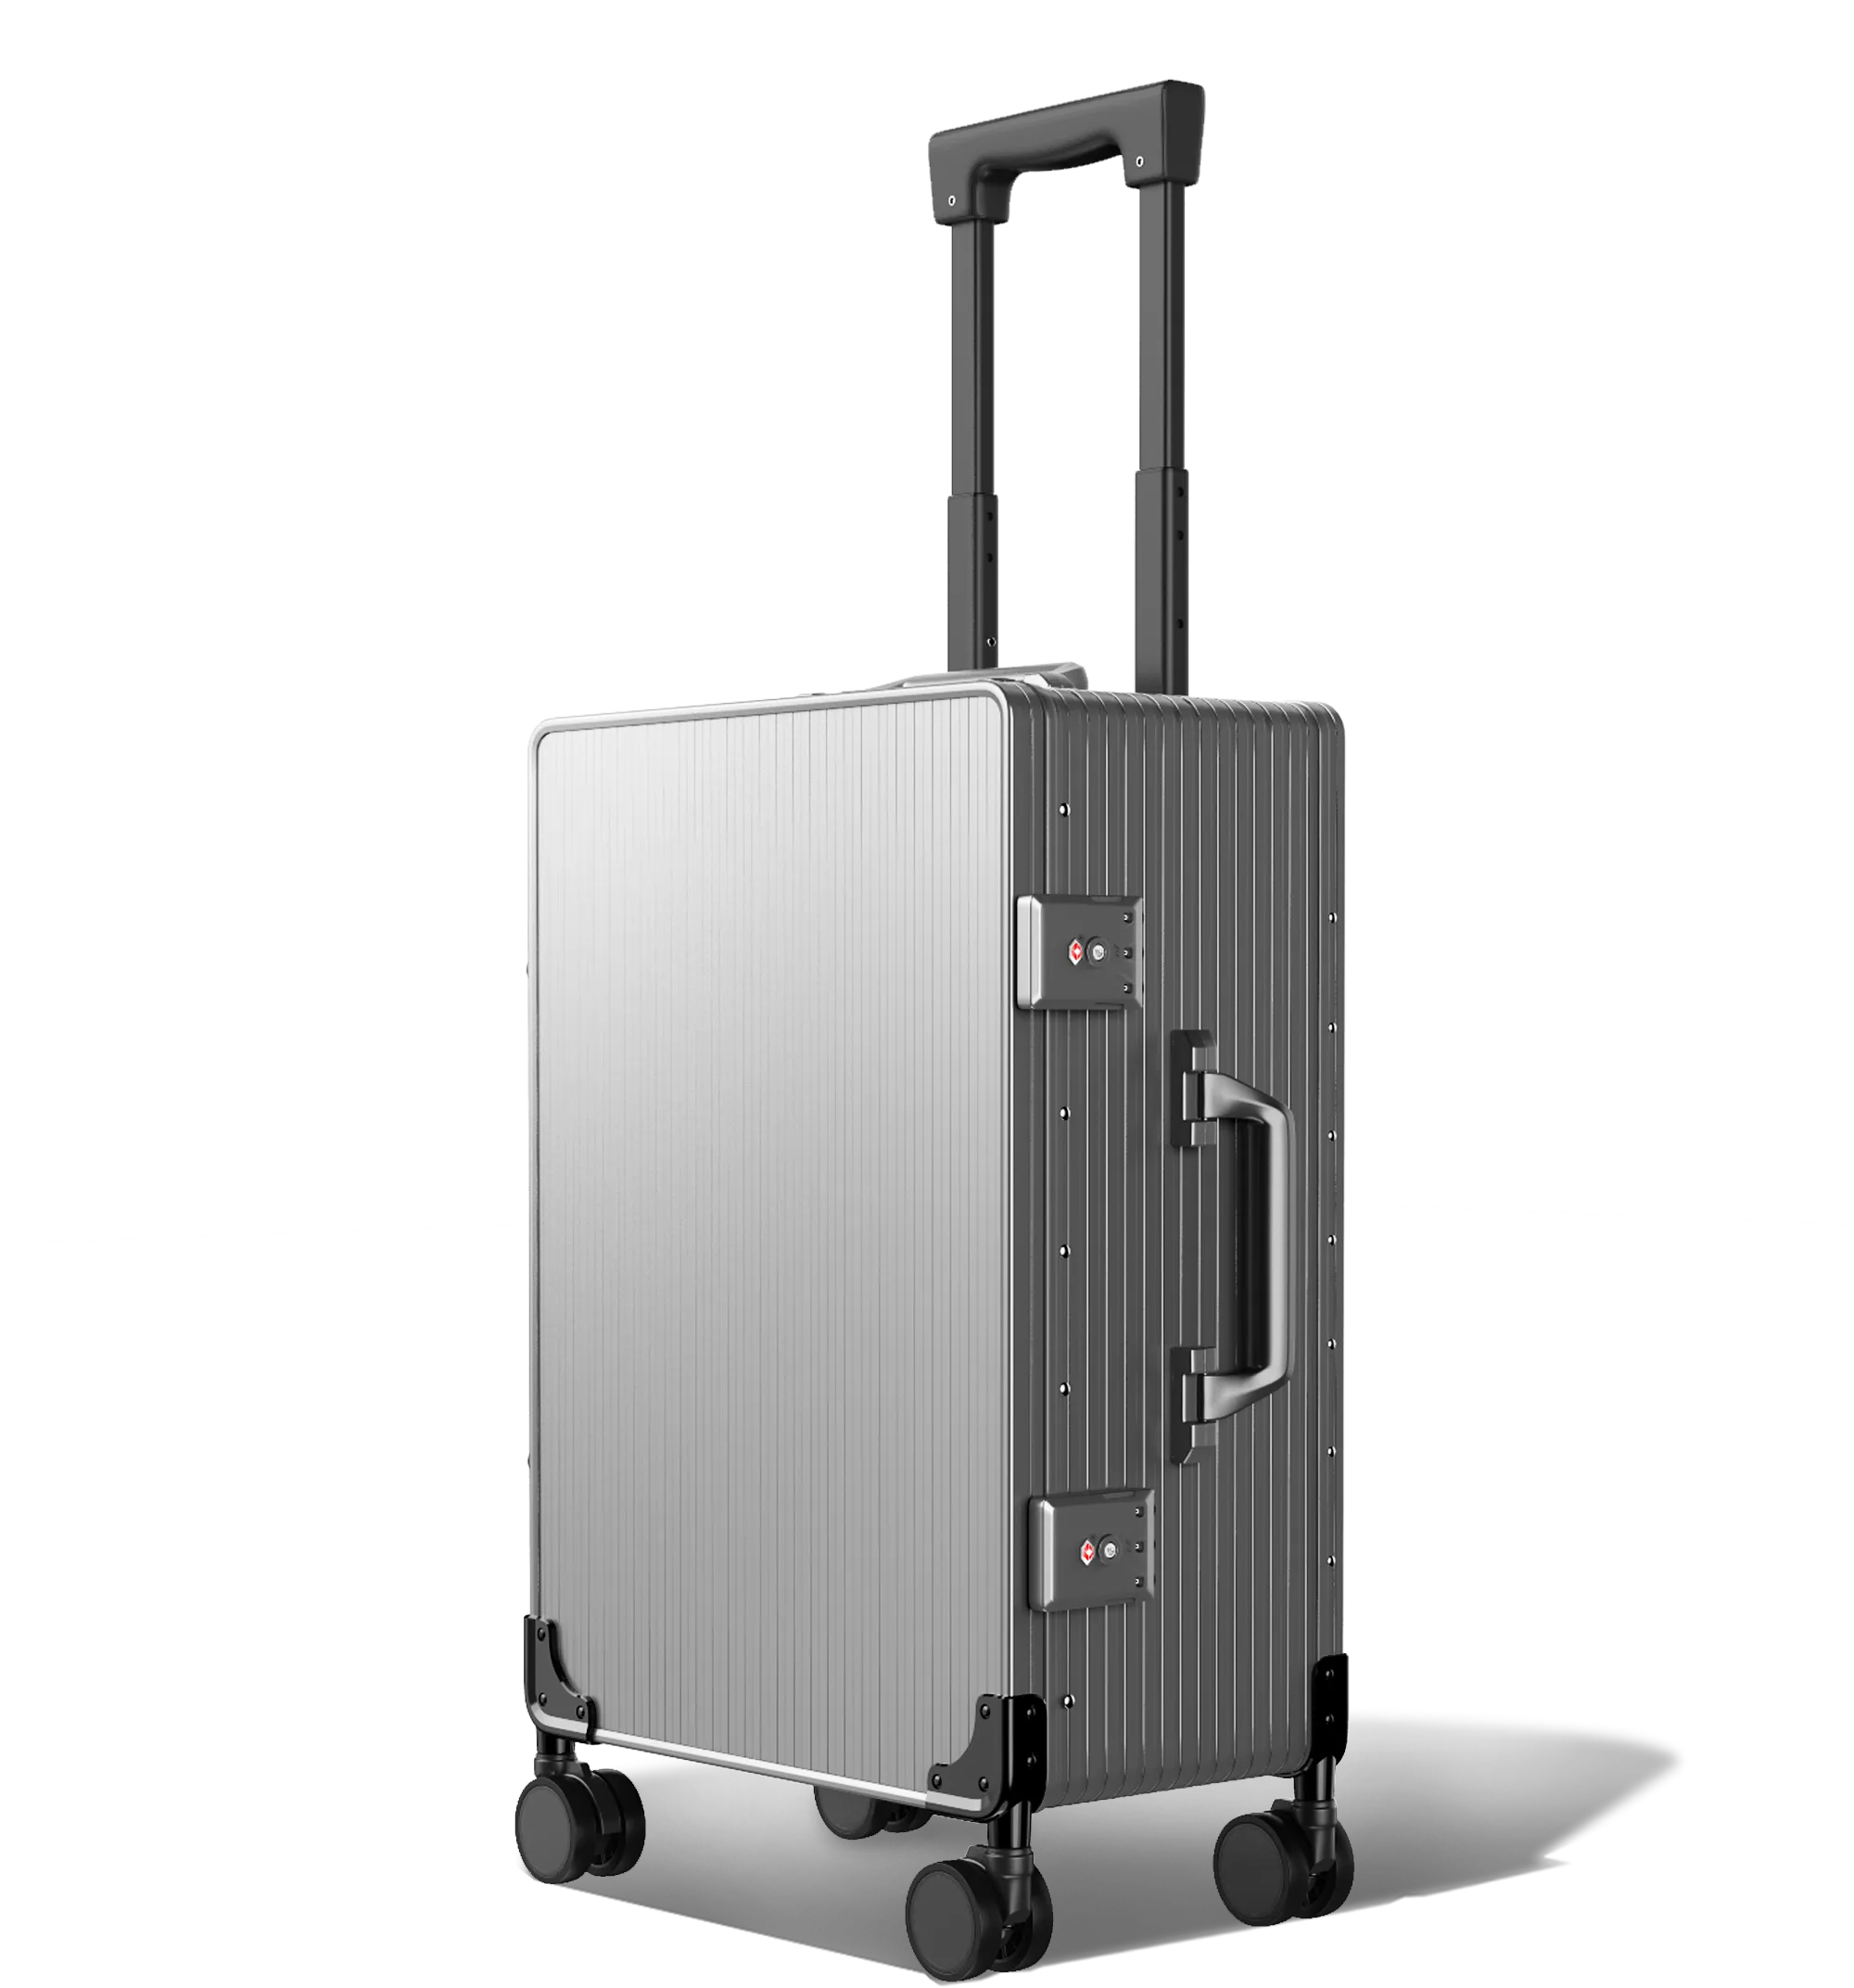 A three-quarter view of an upright Cabin in 56/20 Gun Metal hard-shell aluminium suitcase with a textured surface, featuring an extended telescopic handle, a side handle, and four spinner wheels, set against a white background.